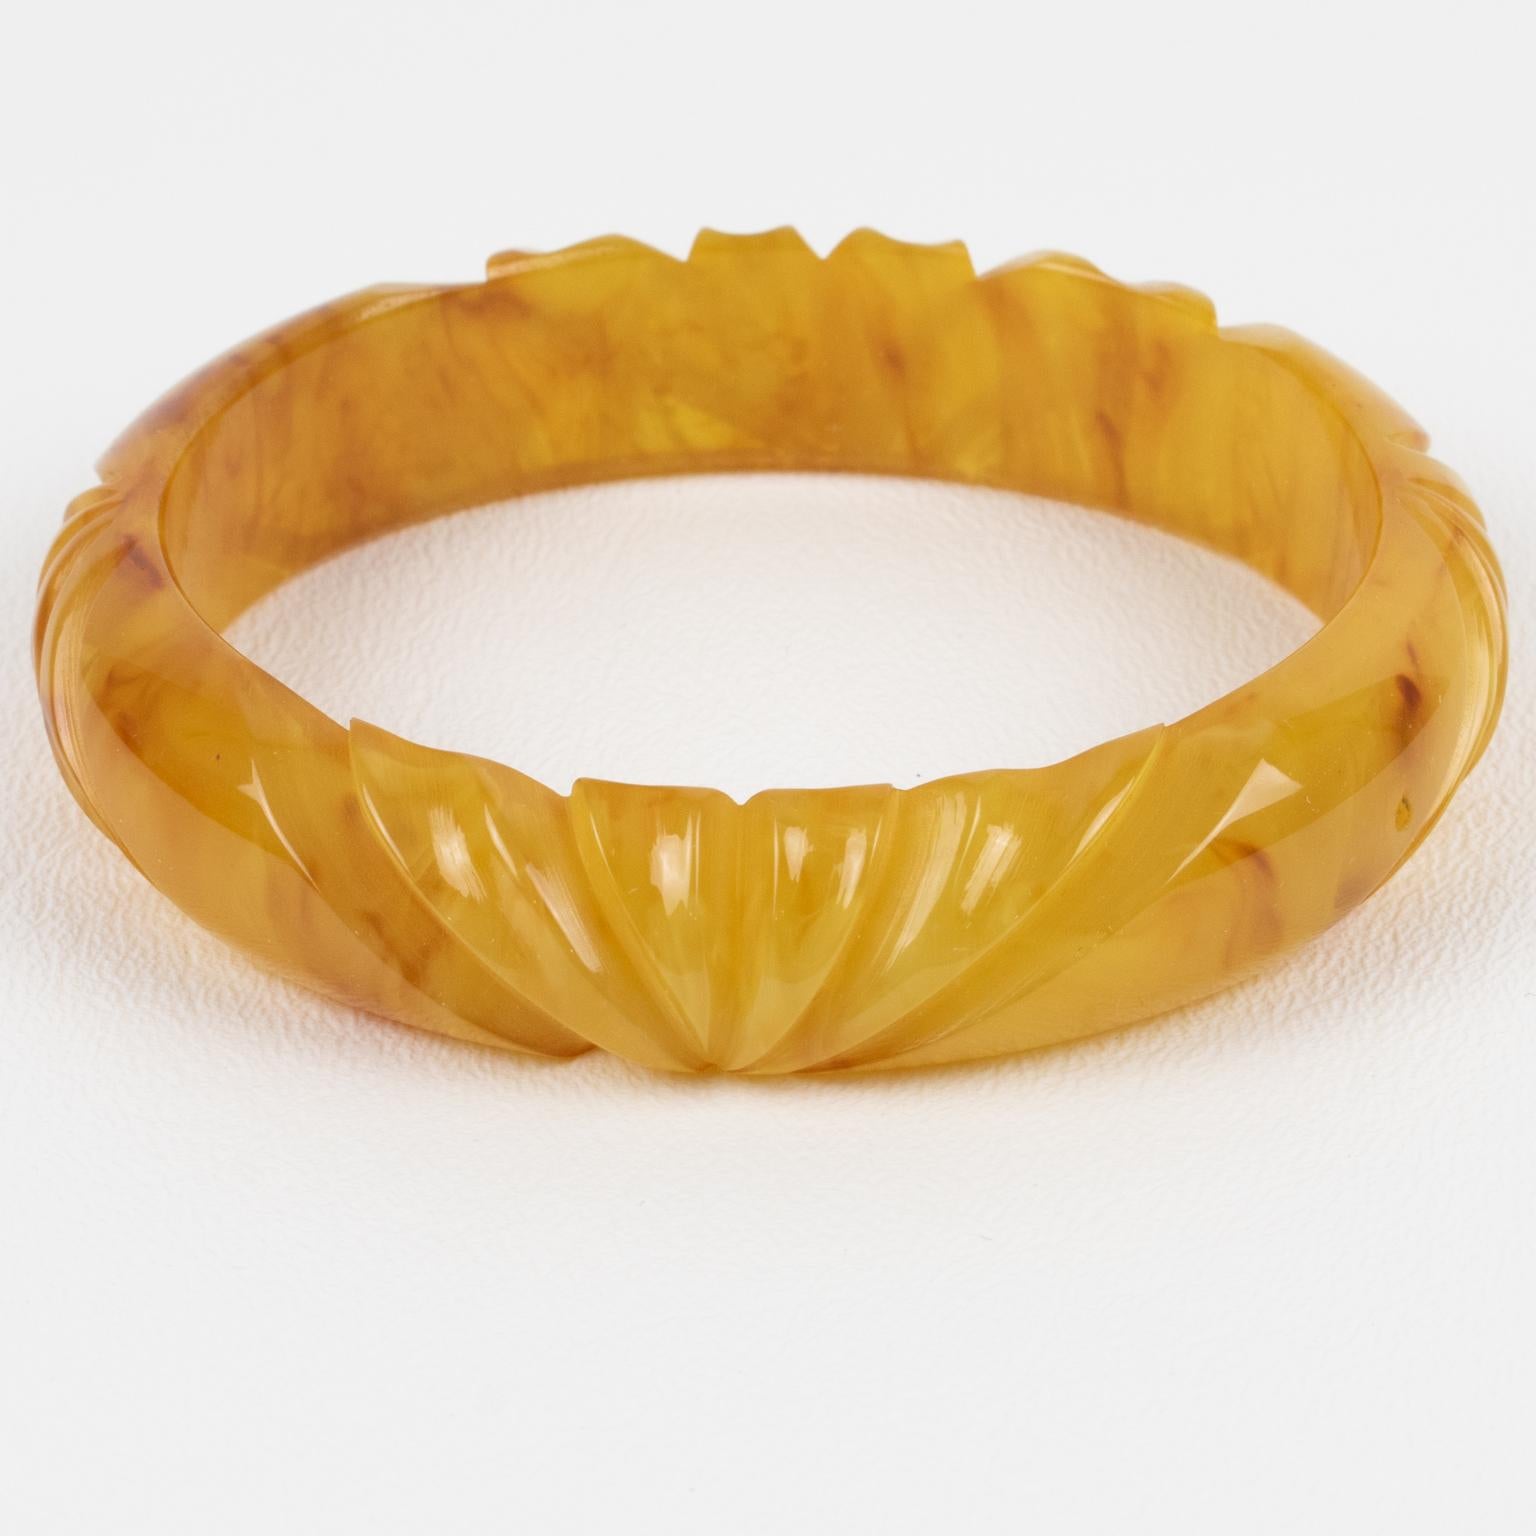 This is a lovely yellow-egg-yolk with red-wine marbling Bakelite carved bracelet bangle. It features a spacer domed shape with deep geometric carving all around. The color is an intense yellow egg yolk tone with red wine and white cloudy swirling.